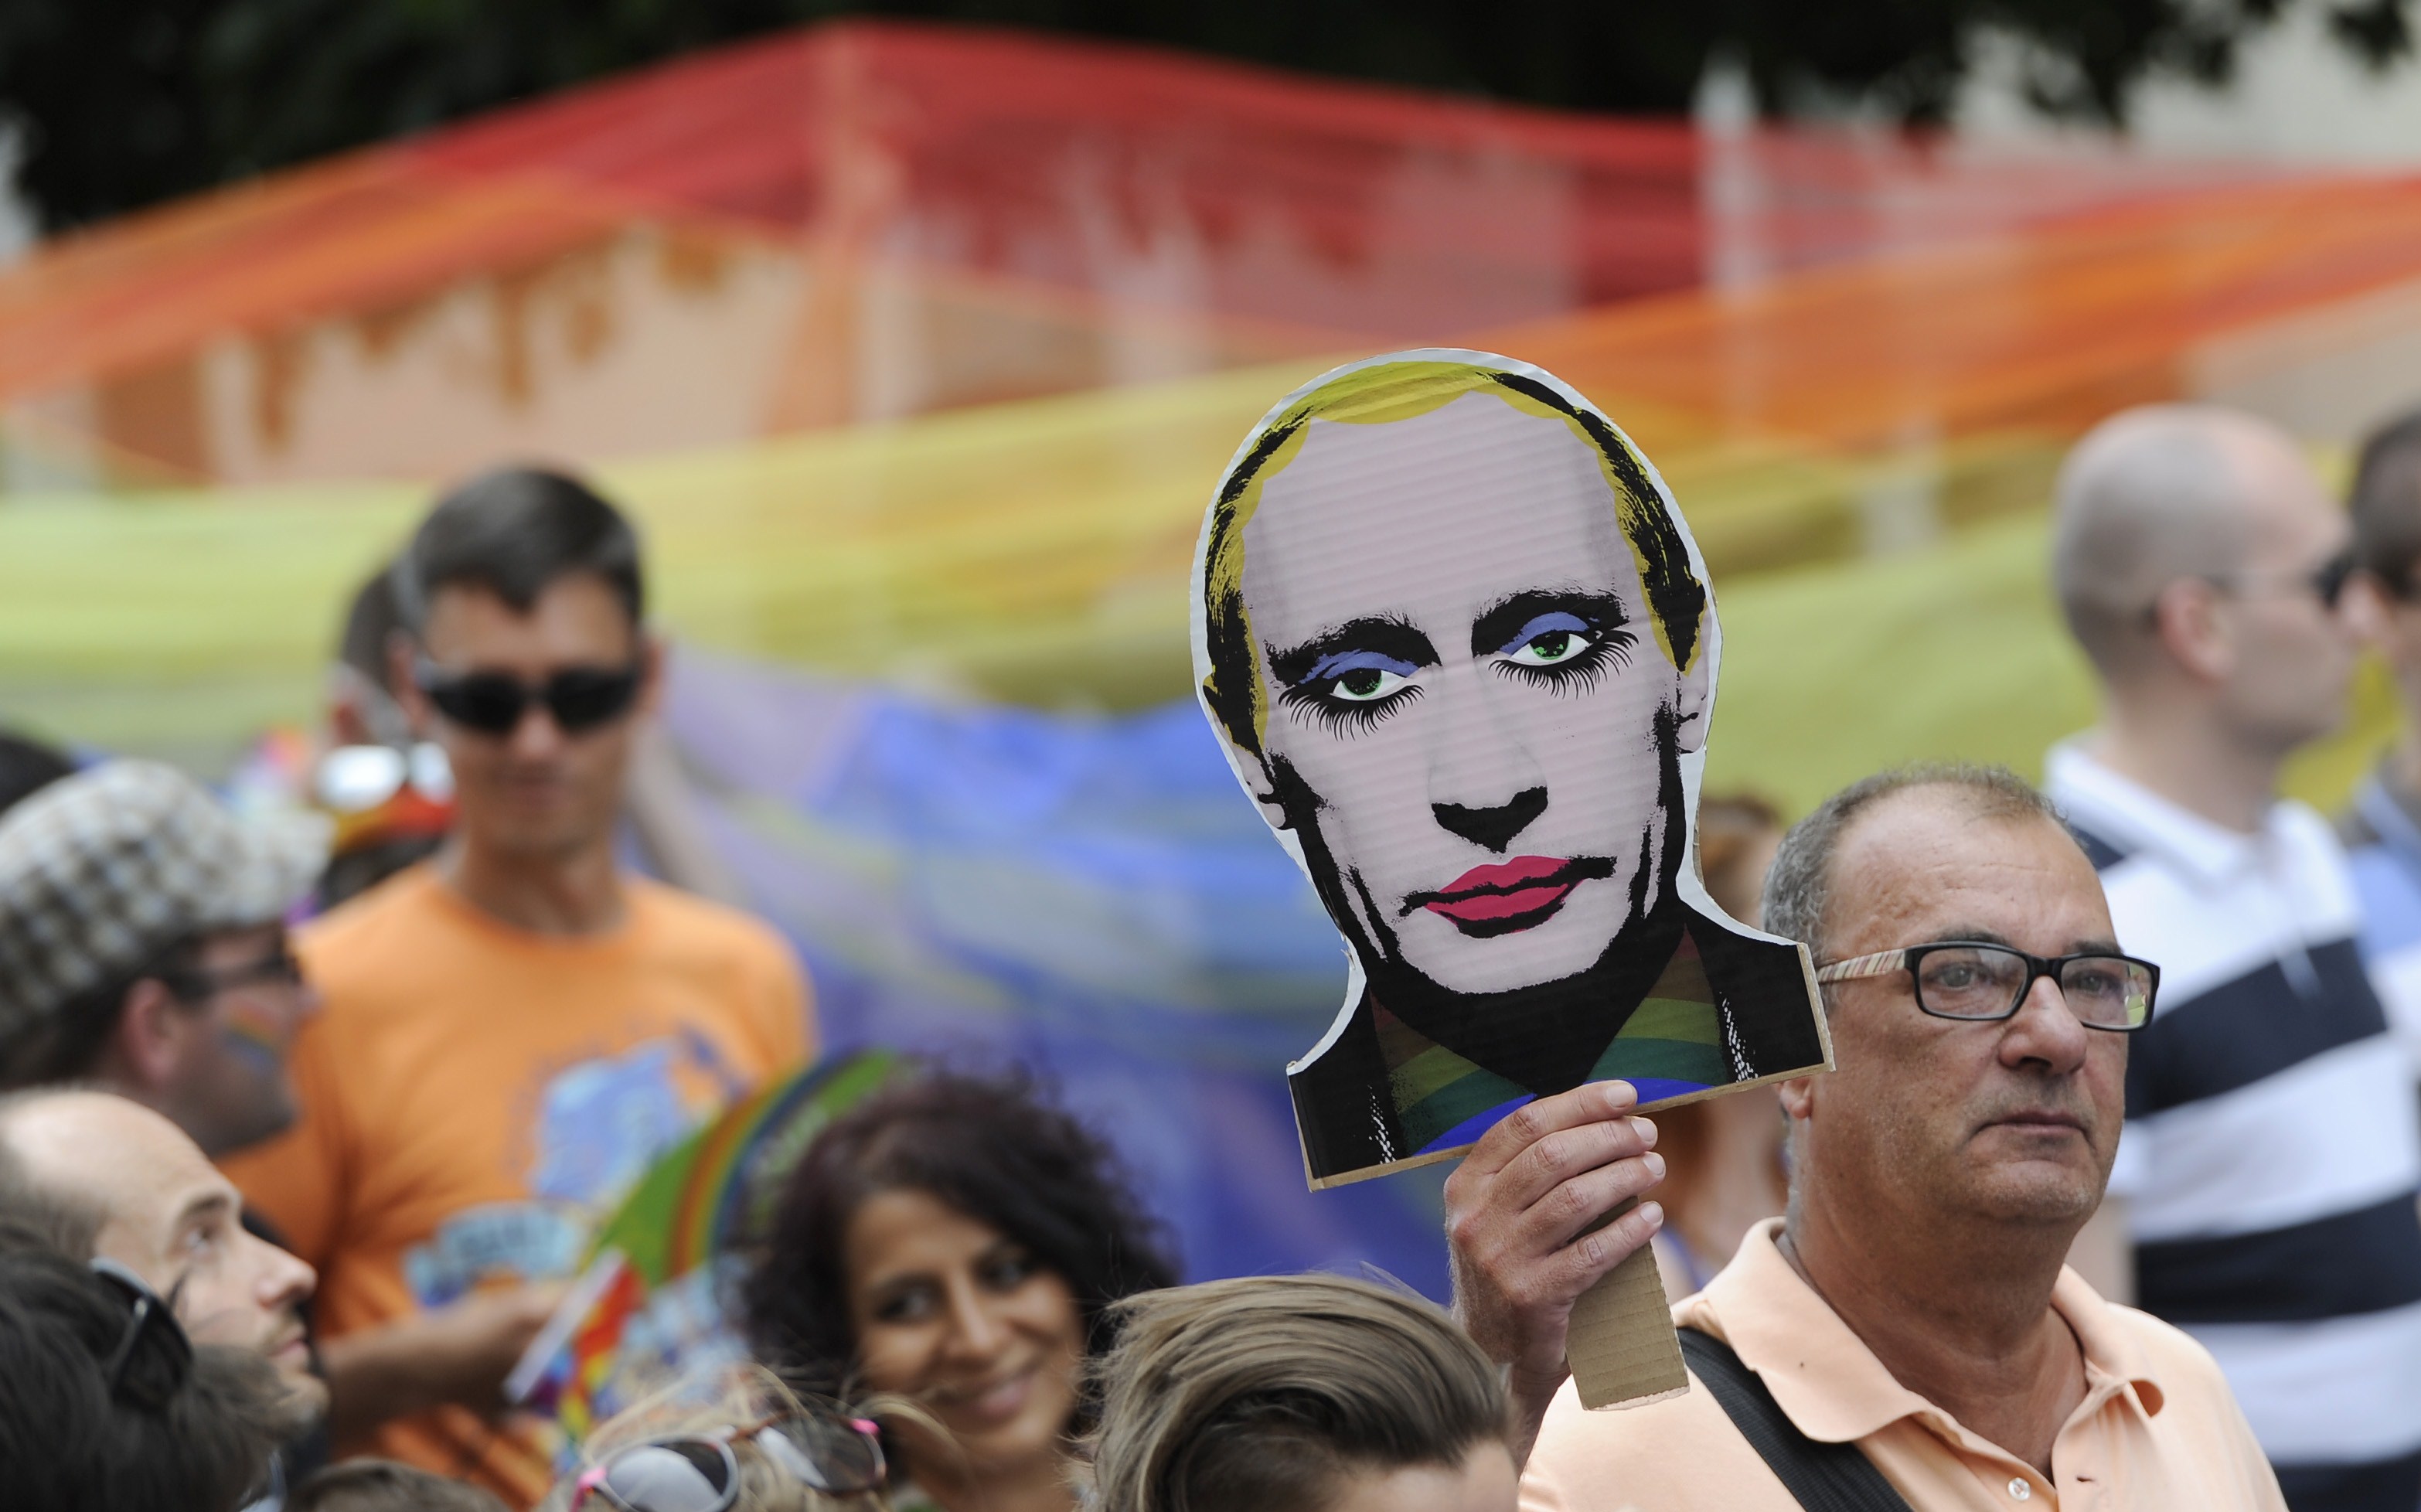 A man holds up a picture of an painted Russian President Vladimir Putin during the LGBT Pride Parade in Bratislava, Slovakia on June 28, 2014. (Samuel Kubani—AFP/Getty Images)